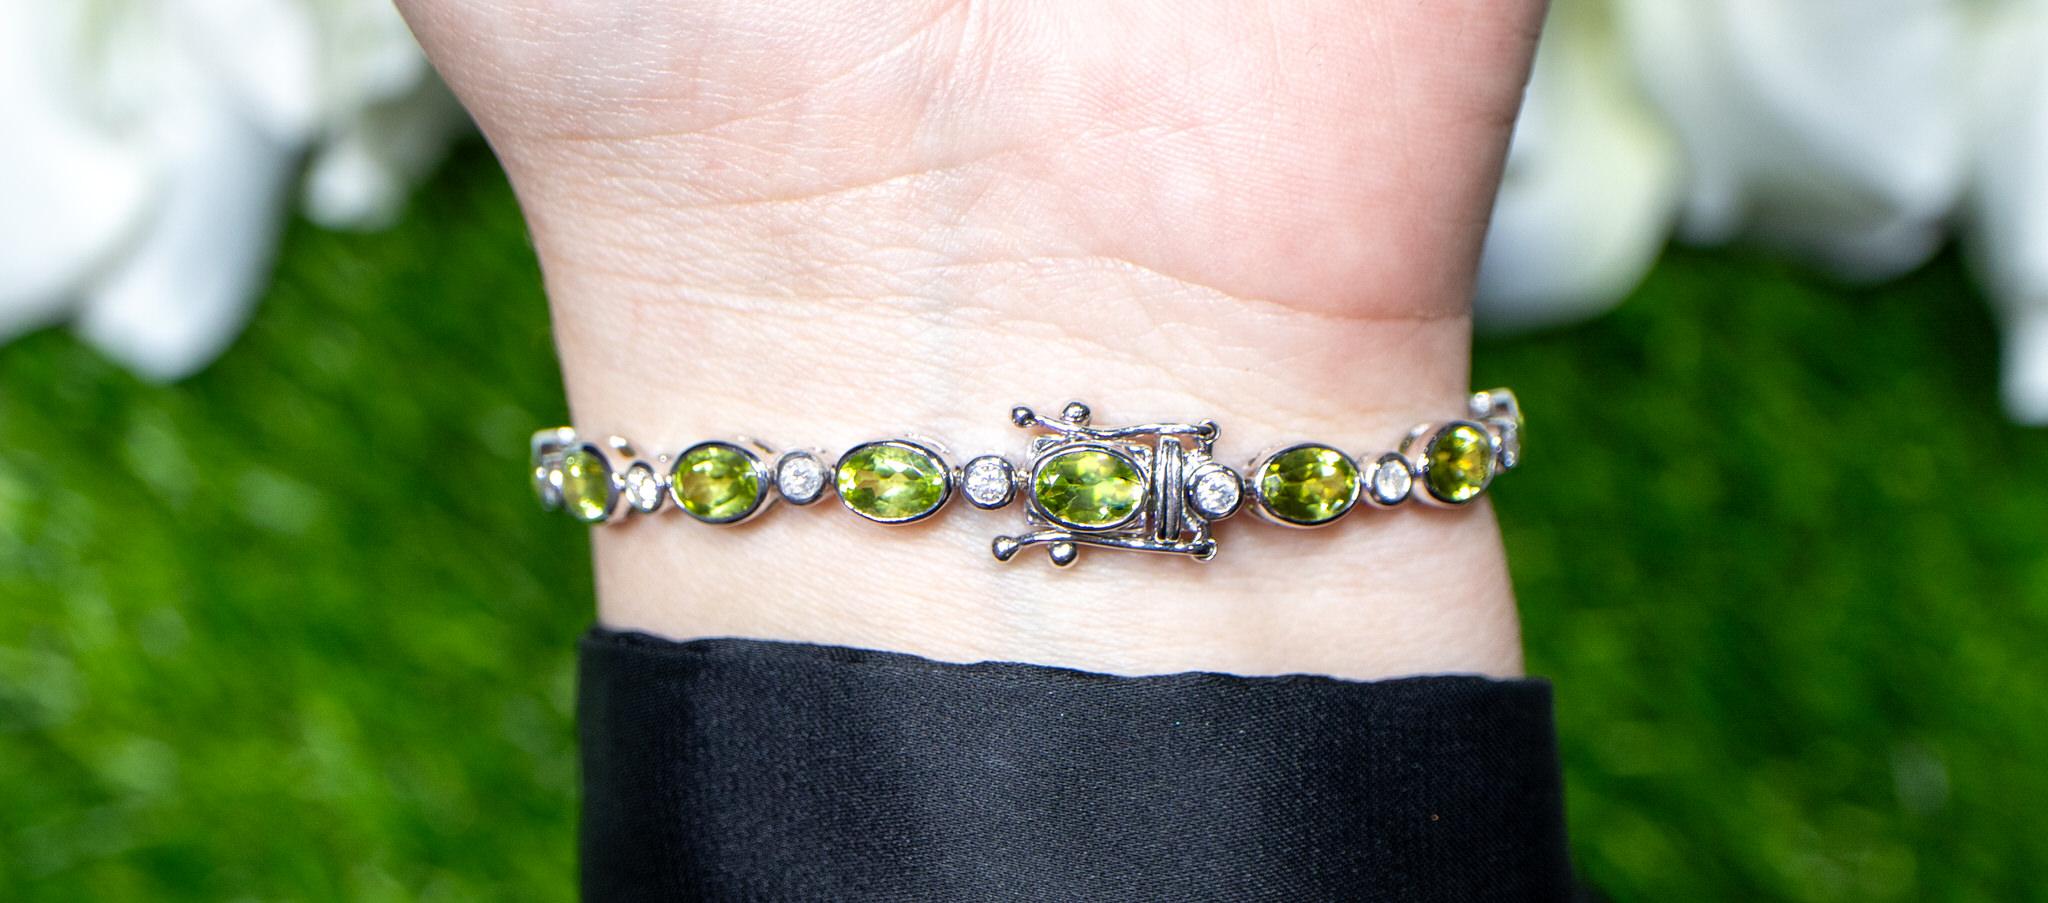 Peridot Bracelet Diamond Links 10 Carats 18K Gold In Excellent Condition For Sale In Laguna Niguel, CA